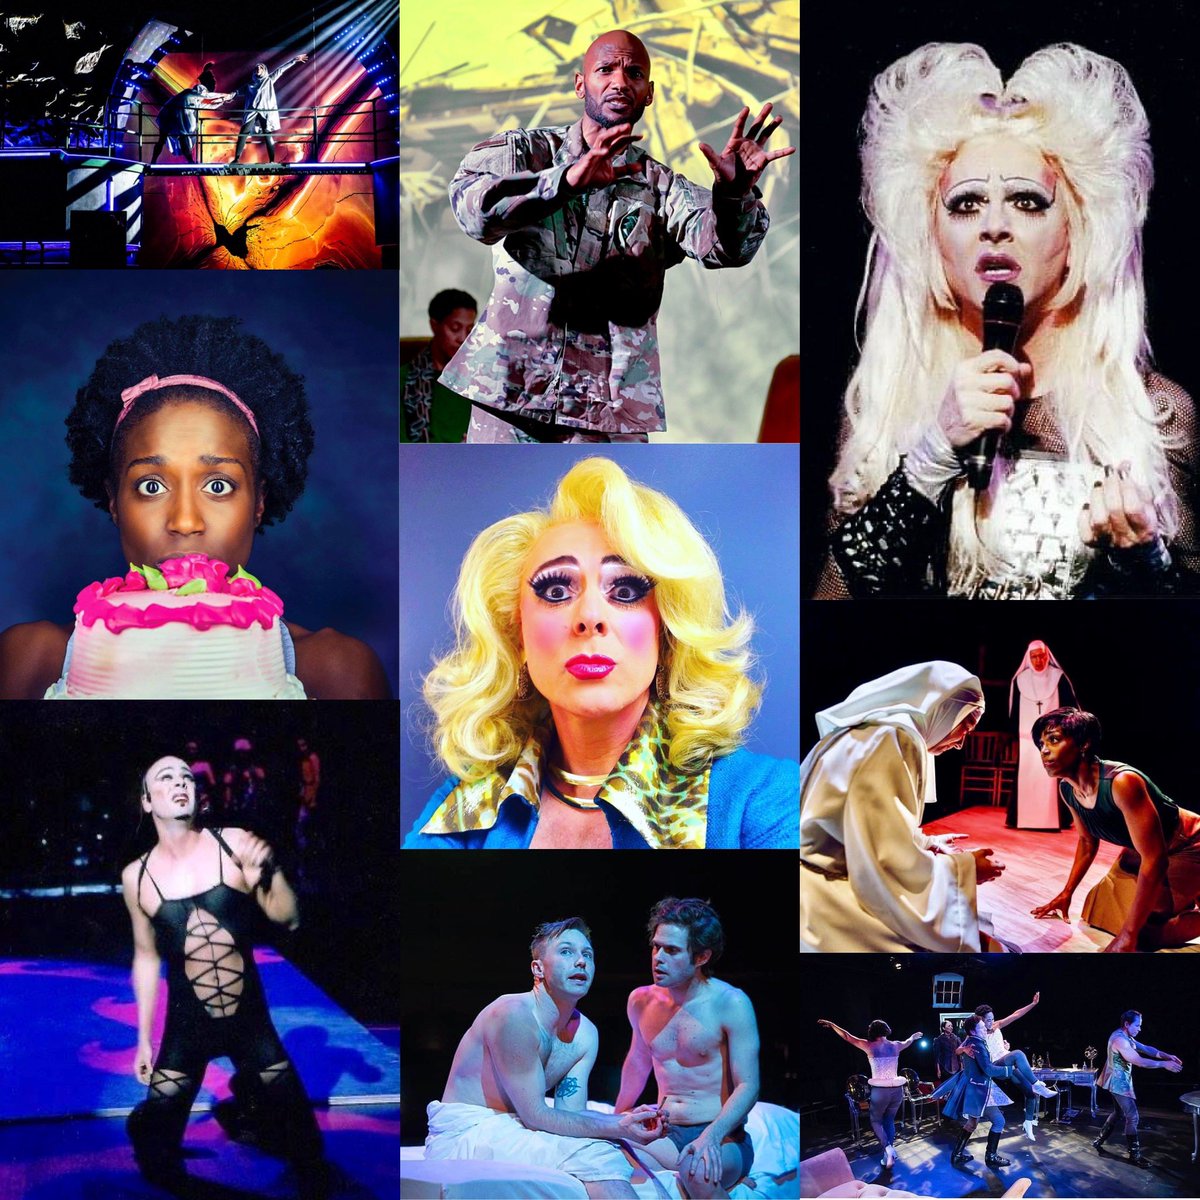 #WorldTheatreDay ⁣
⁣
AFTER DECEMBER & WAR IN PIECES (@vareptheatre), HEDWIG & THE ANGRY INCH (@sigtheatre), AGNES OF GOD (@Factory449), EMILIE… (@AvantBard), REYKJAVIK (@rorschachdc), THE ROCKY HORROR SHOW (ATW), LELA & CO. (F449), LEGEND OF GEORGIA MCBRIDE (@RHT_roundhouse)⁣